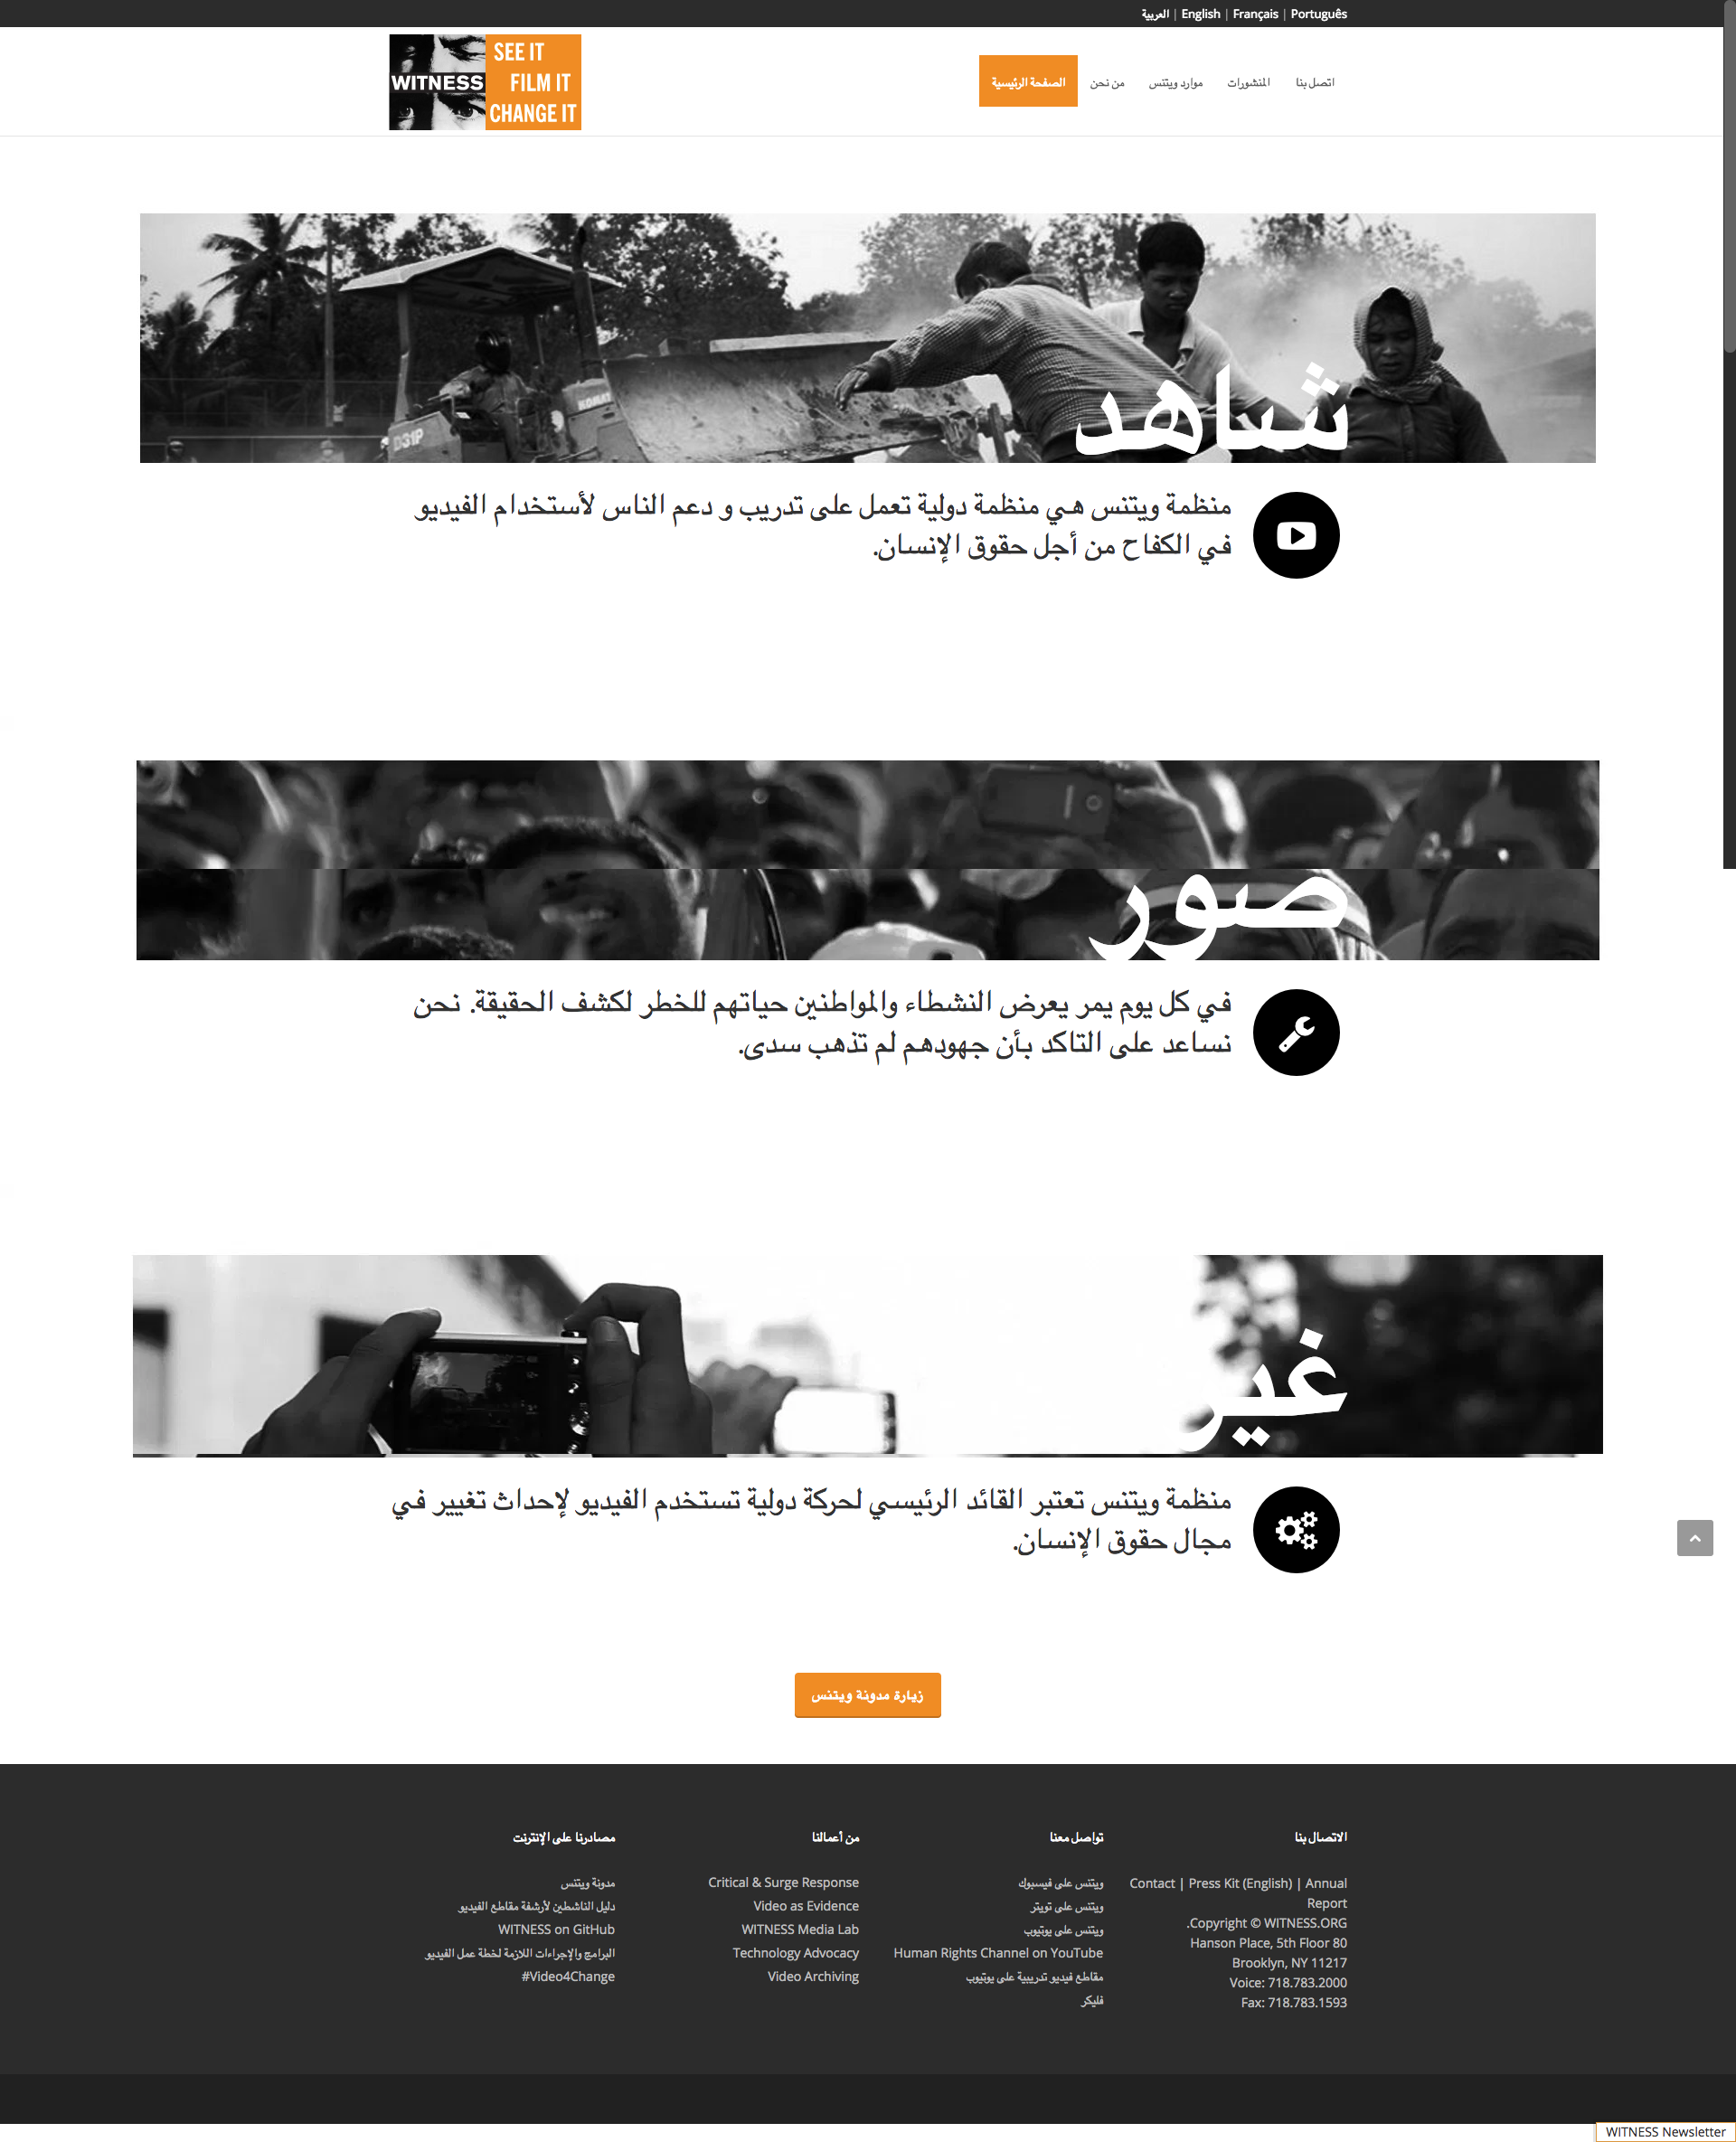 Homepage in Arabic; See it, Film it, Change it, on black and white photographs from Witness' work around the world